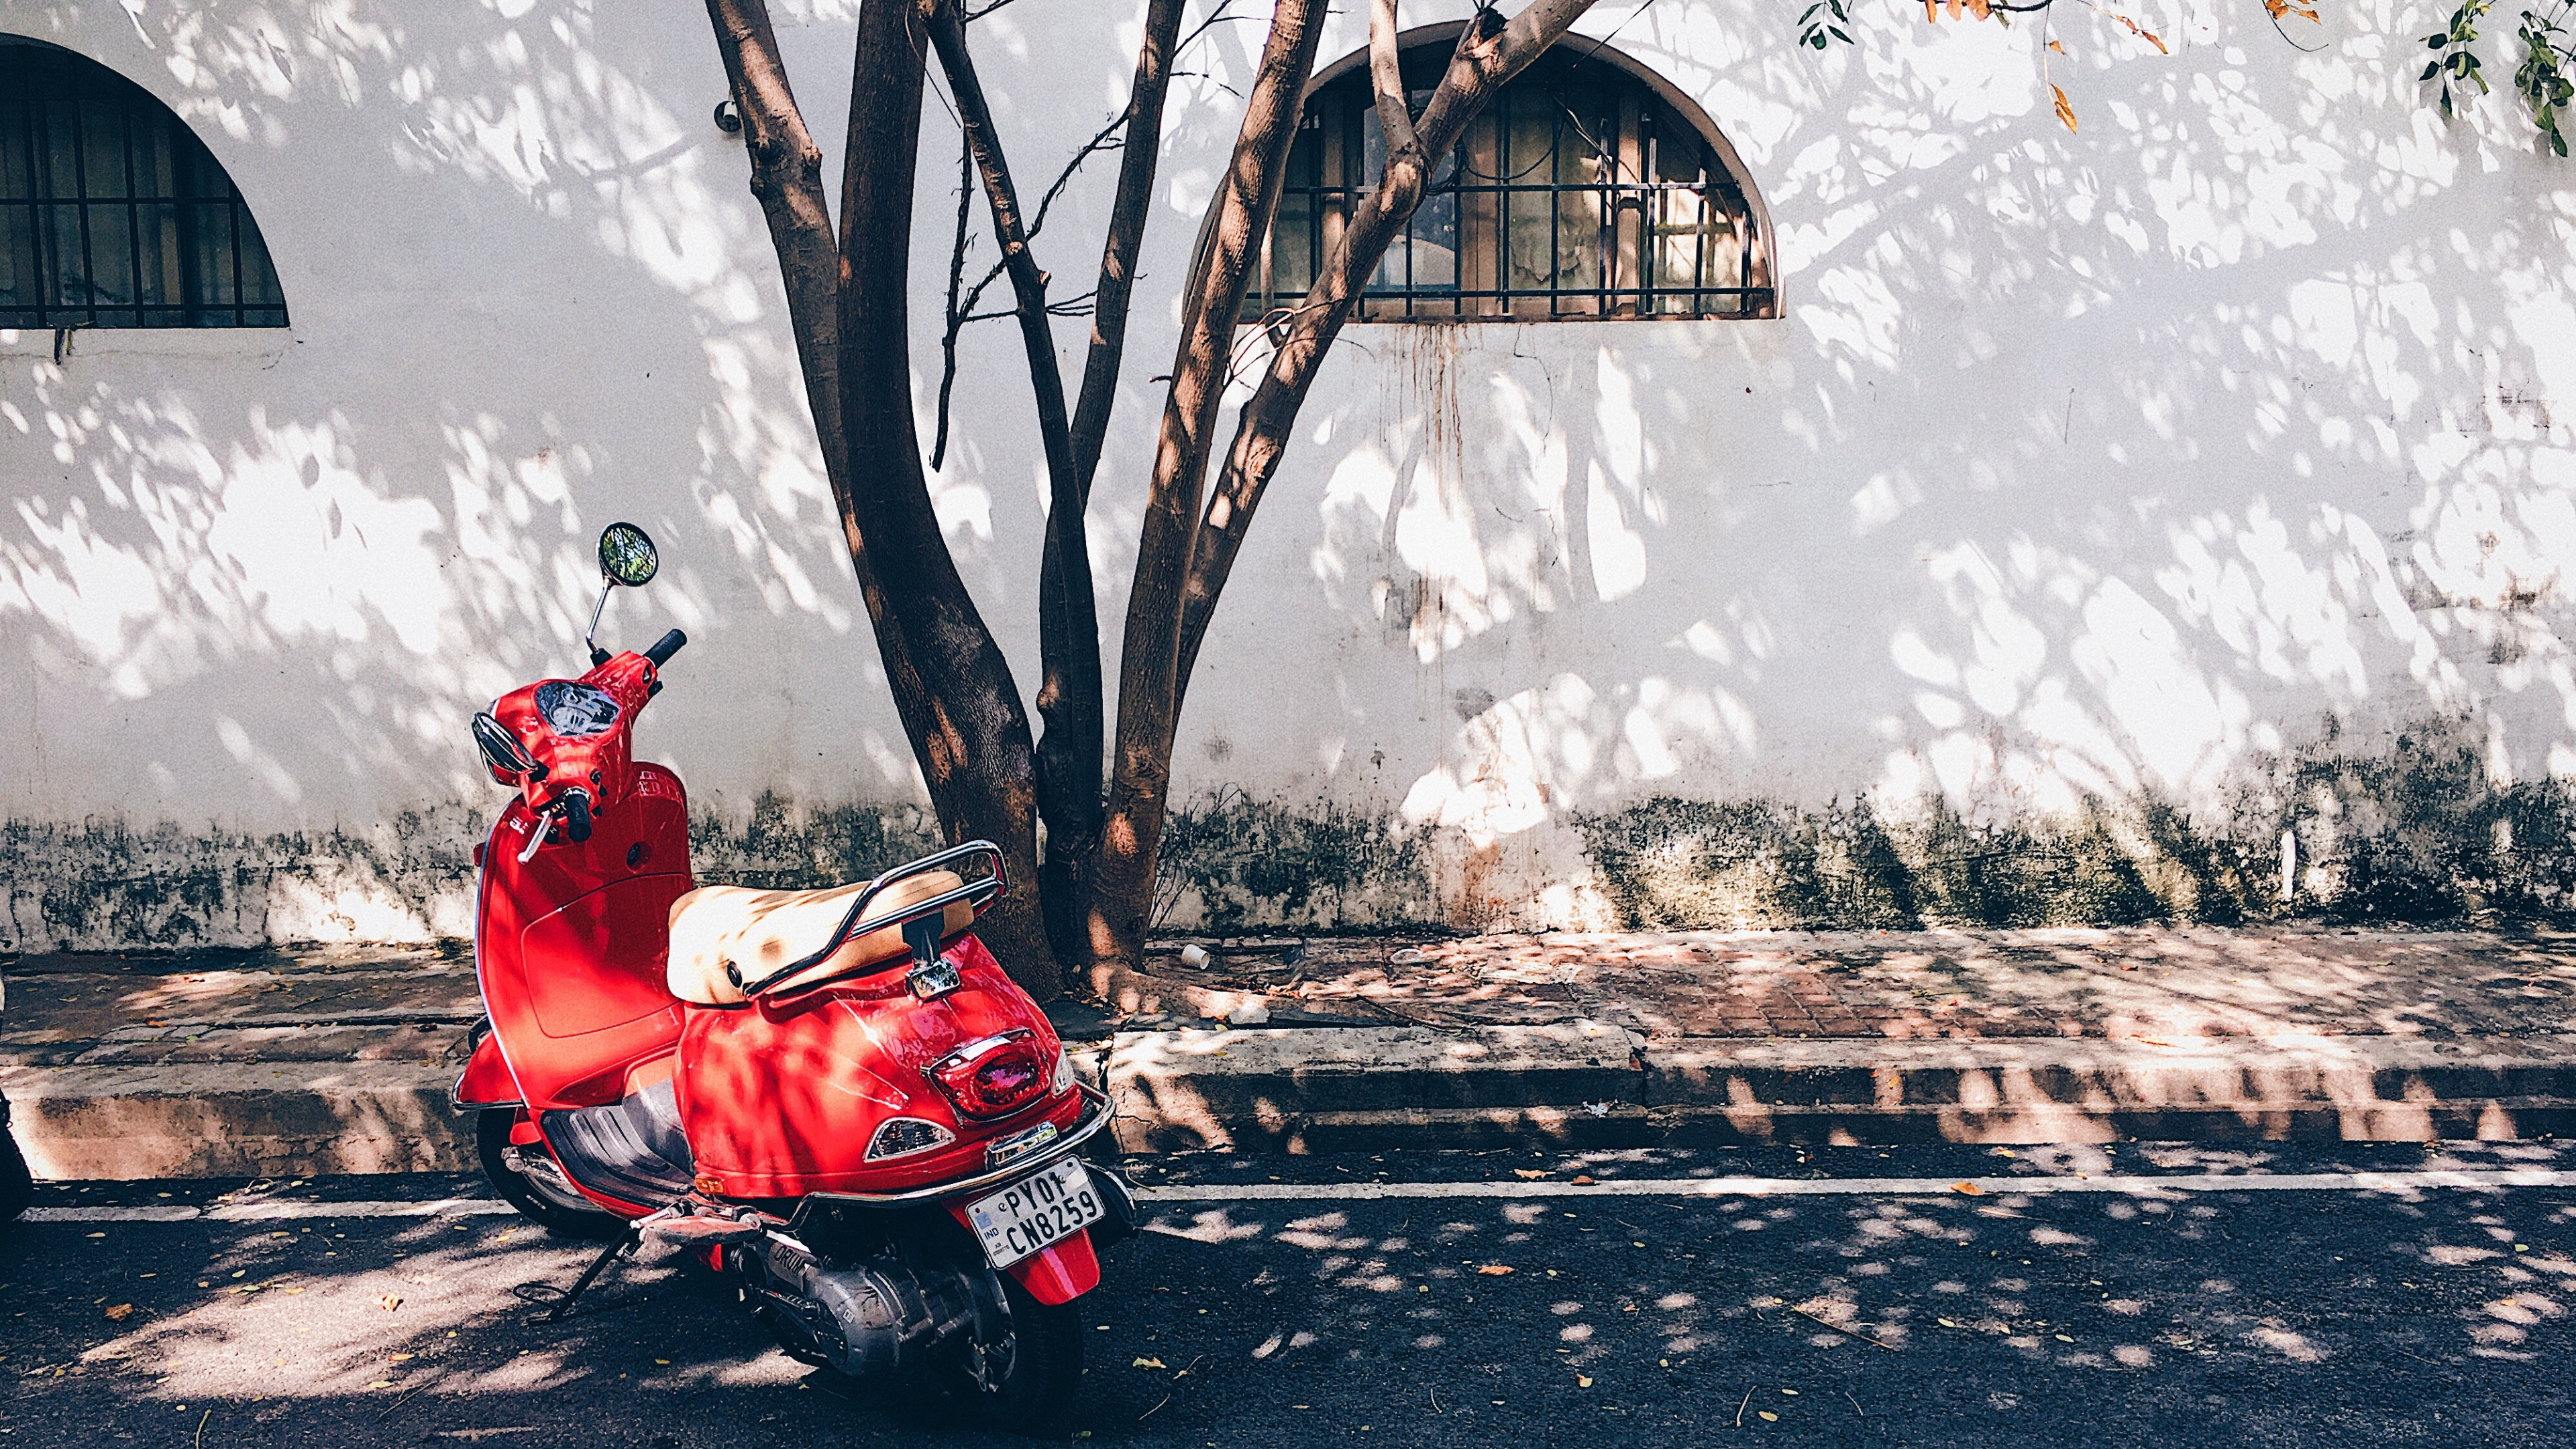 Man in Red Jacket Riding Red Motor Scooter on Road During Daytime. Wallpaper in 3840x2160 Resolution